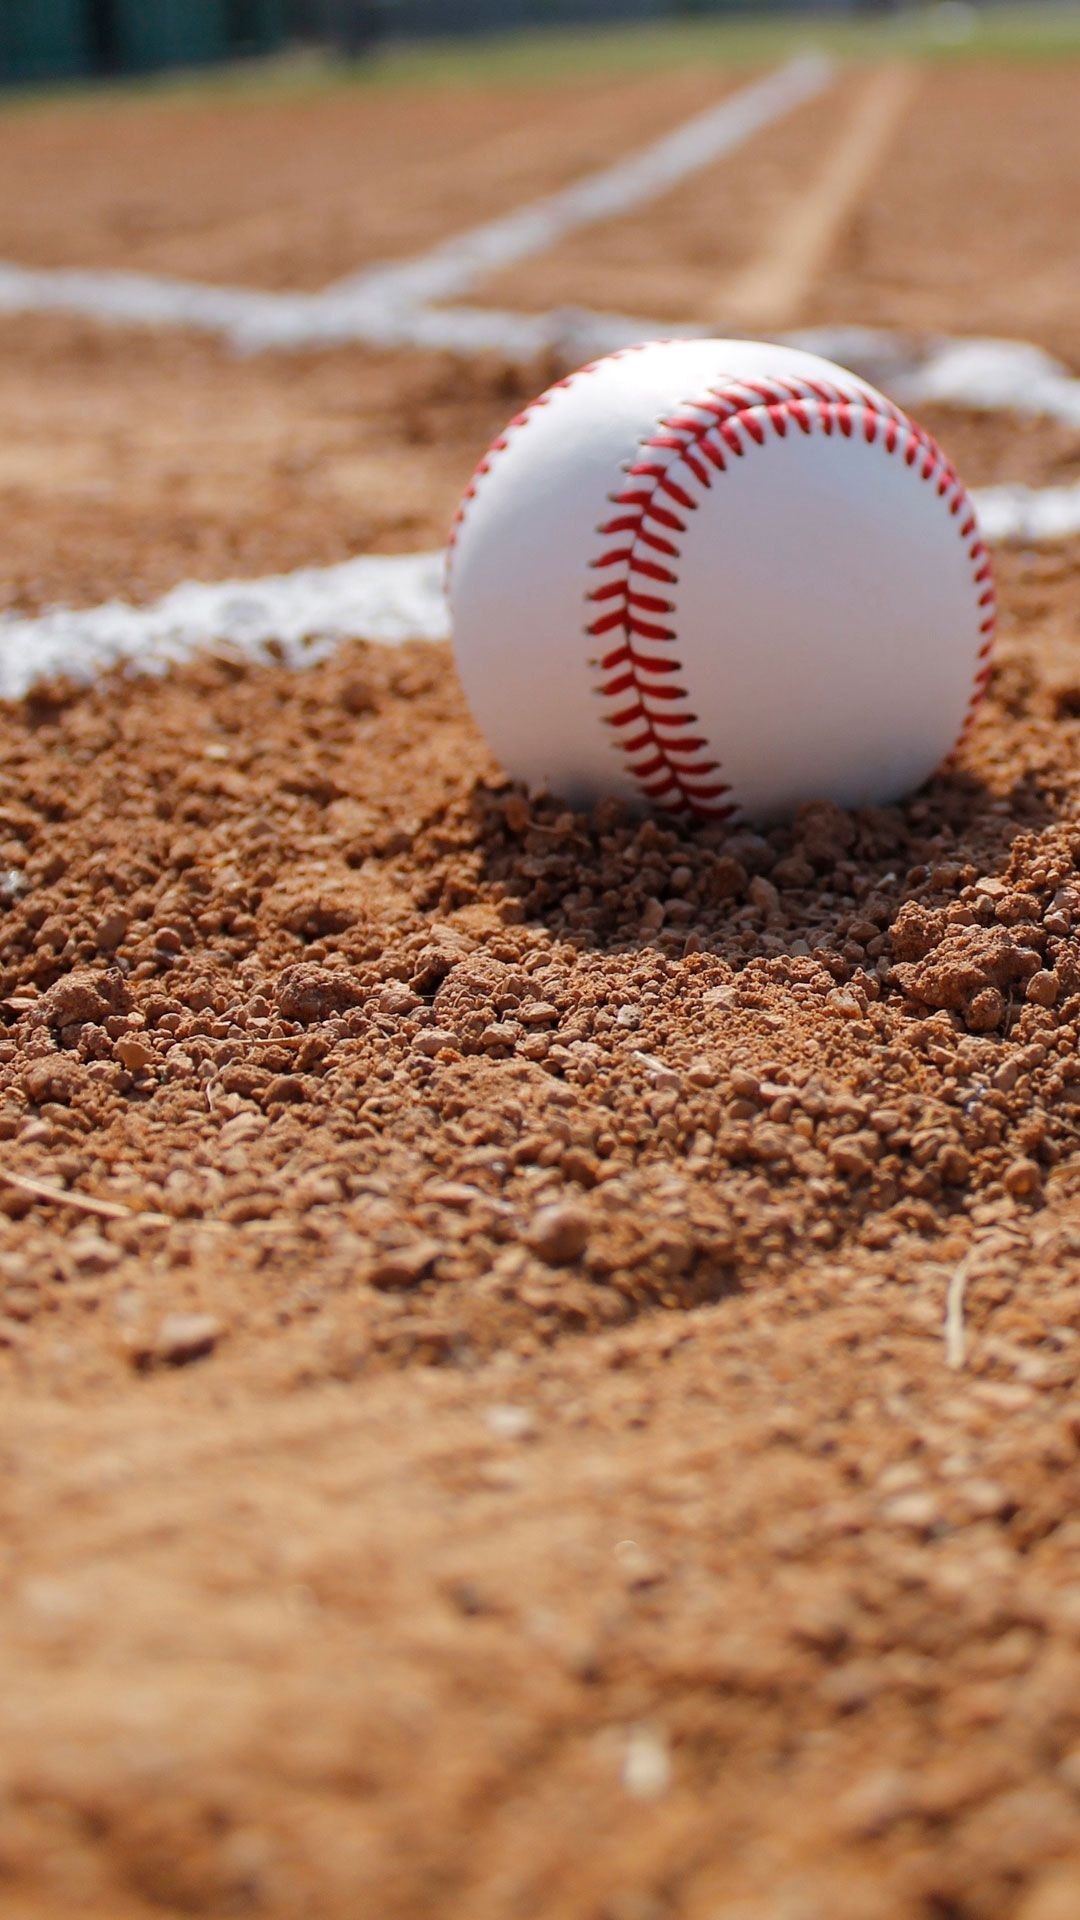 Softball: Similar-to-baseball game played with a larger ball, A bat-and-ball game. 1080x1920 Full HD Background.